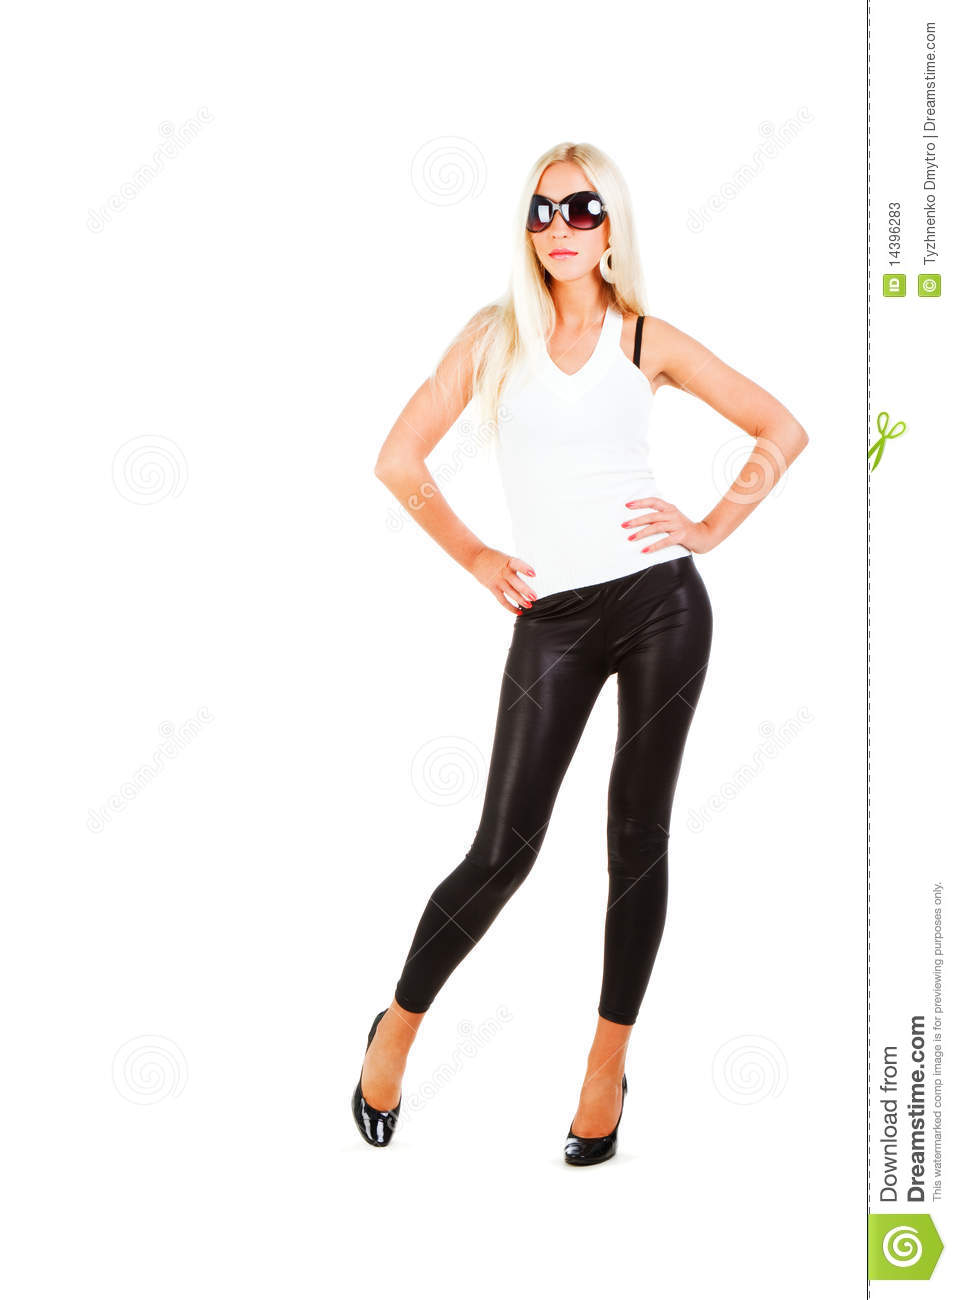 Young Beautiful Fitness Girl In Black Leggings  Isolated On White